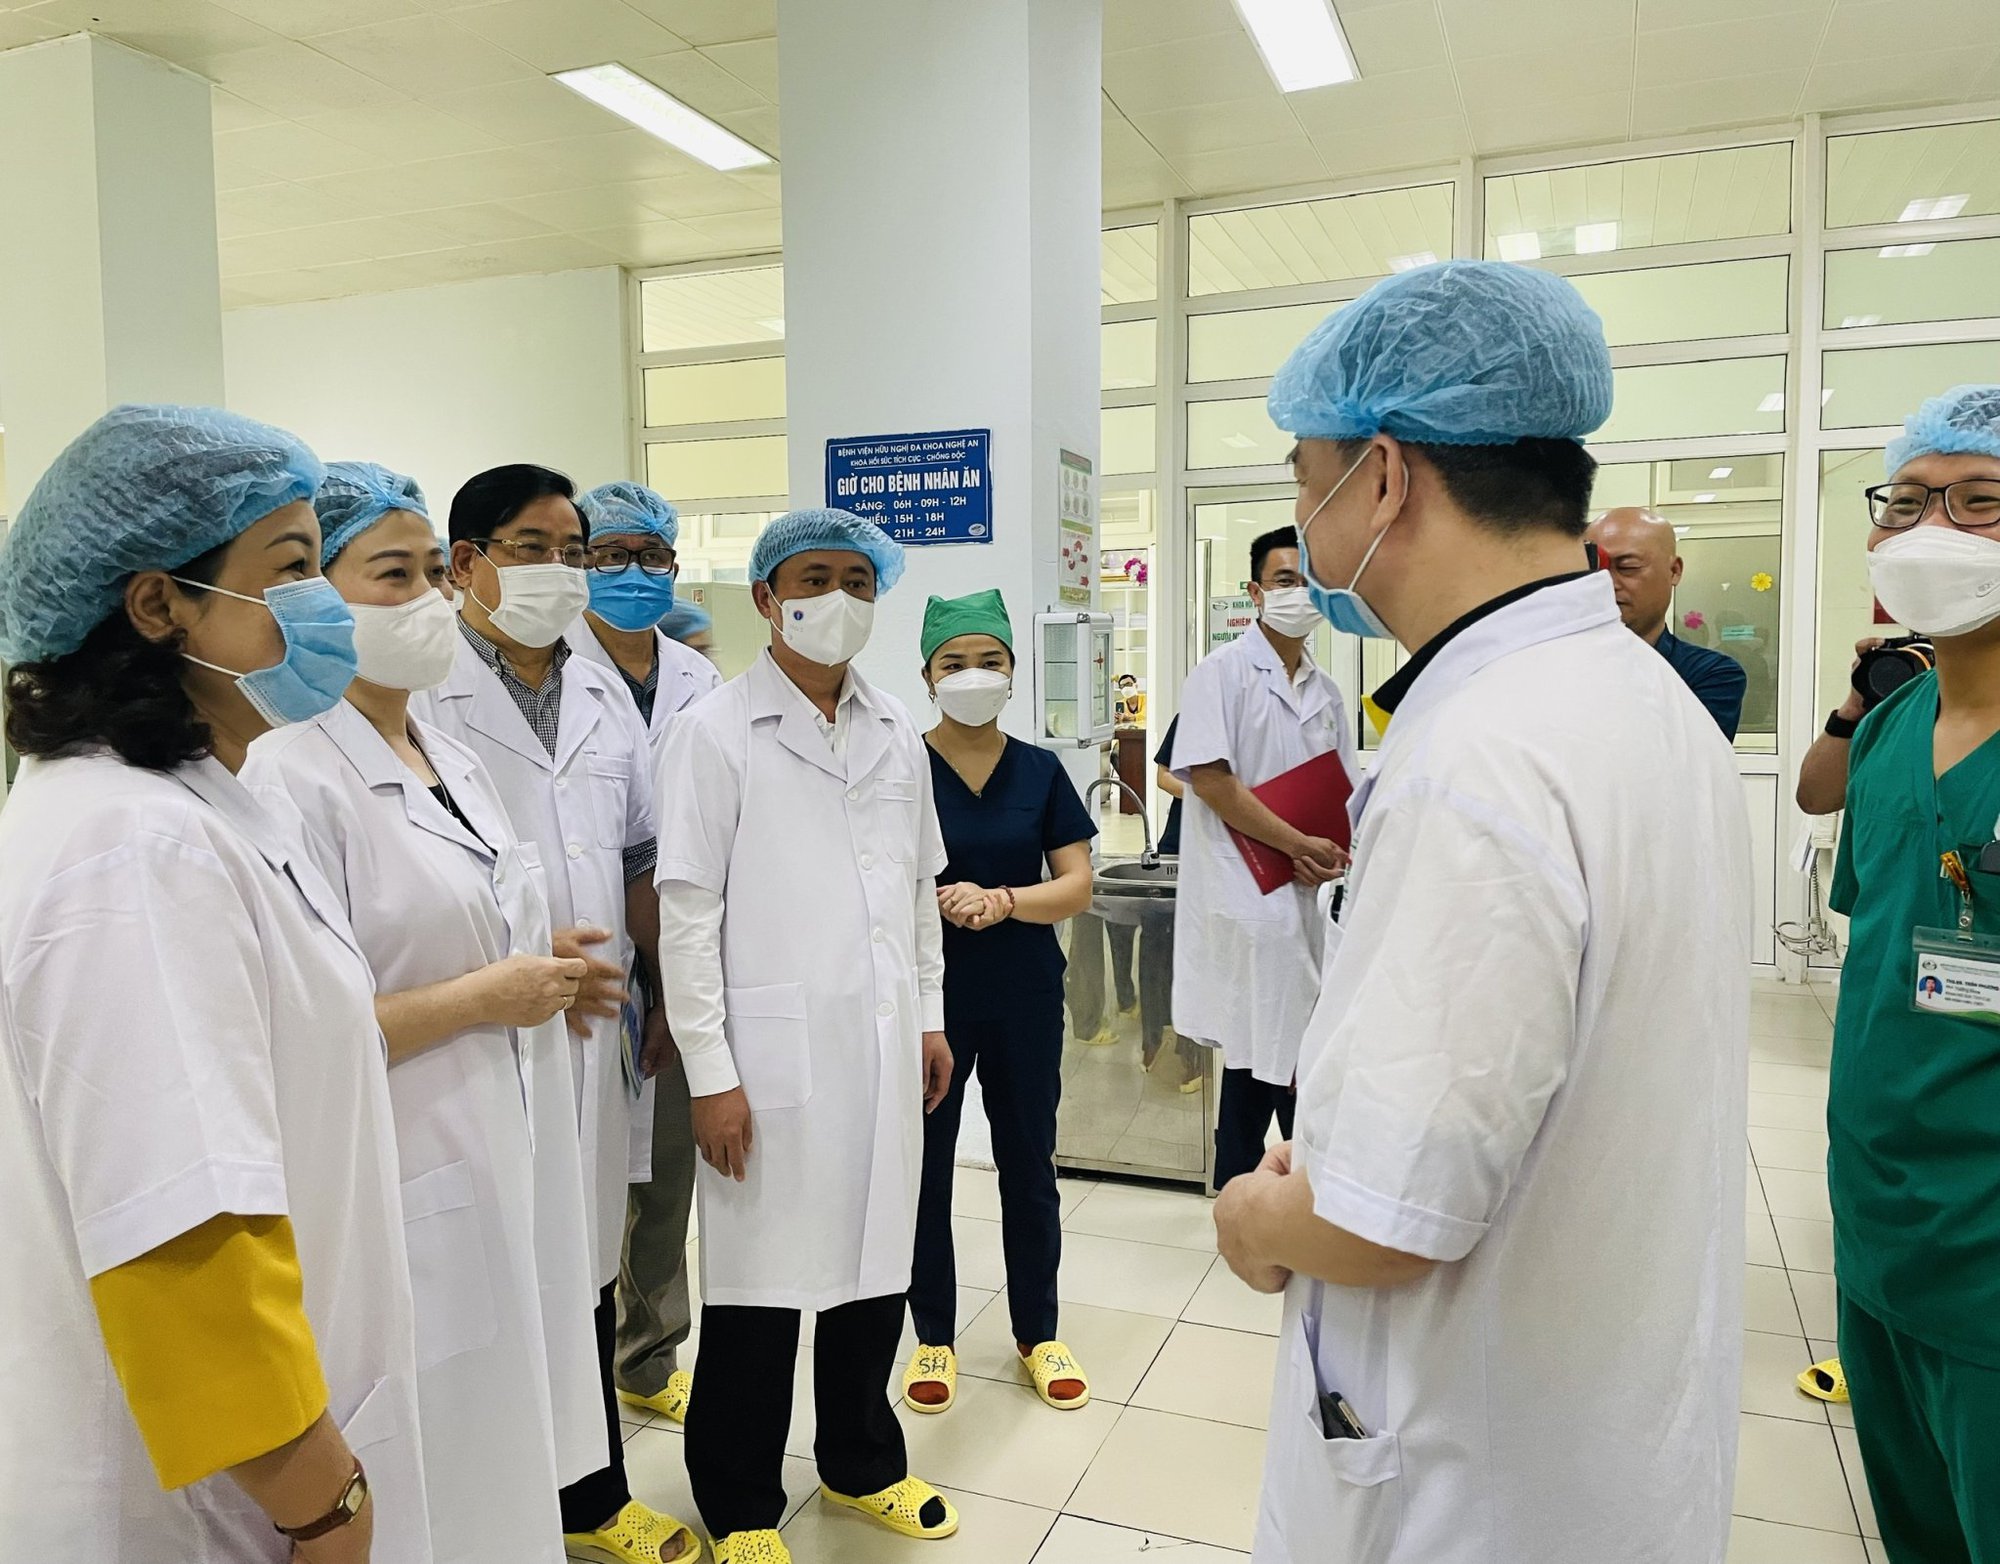 Vietnam: The Ministry of Health strengthens prevention and control of measles and avian influenza transmission in healthcare facilities